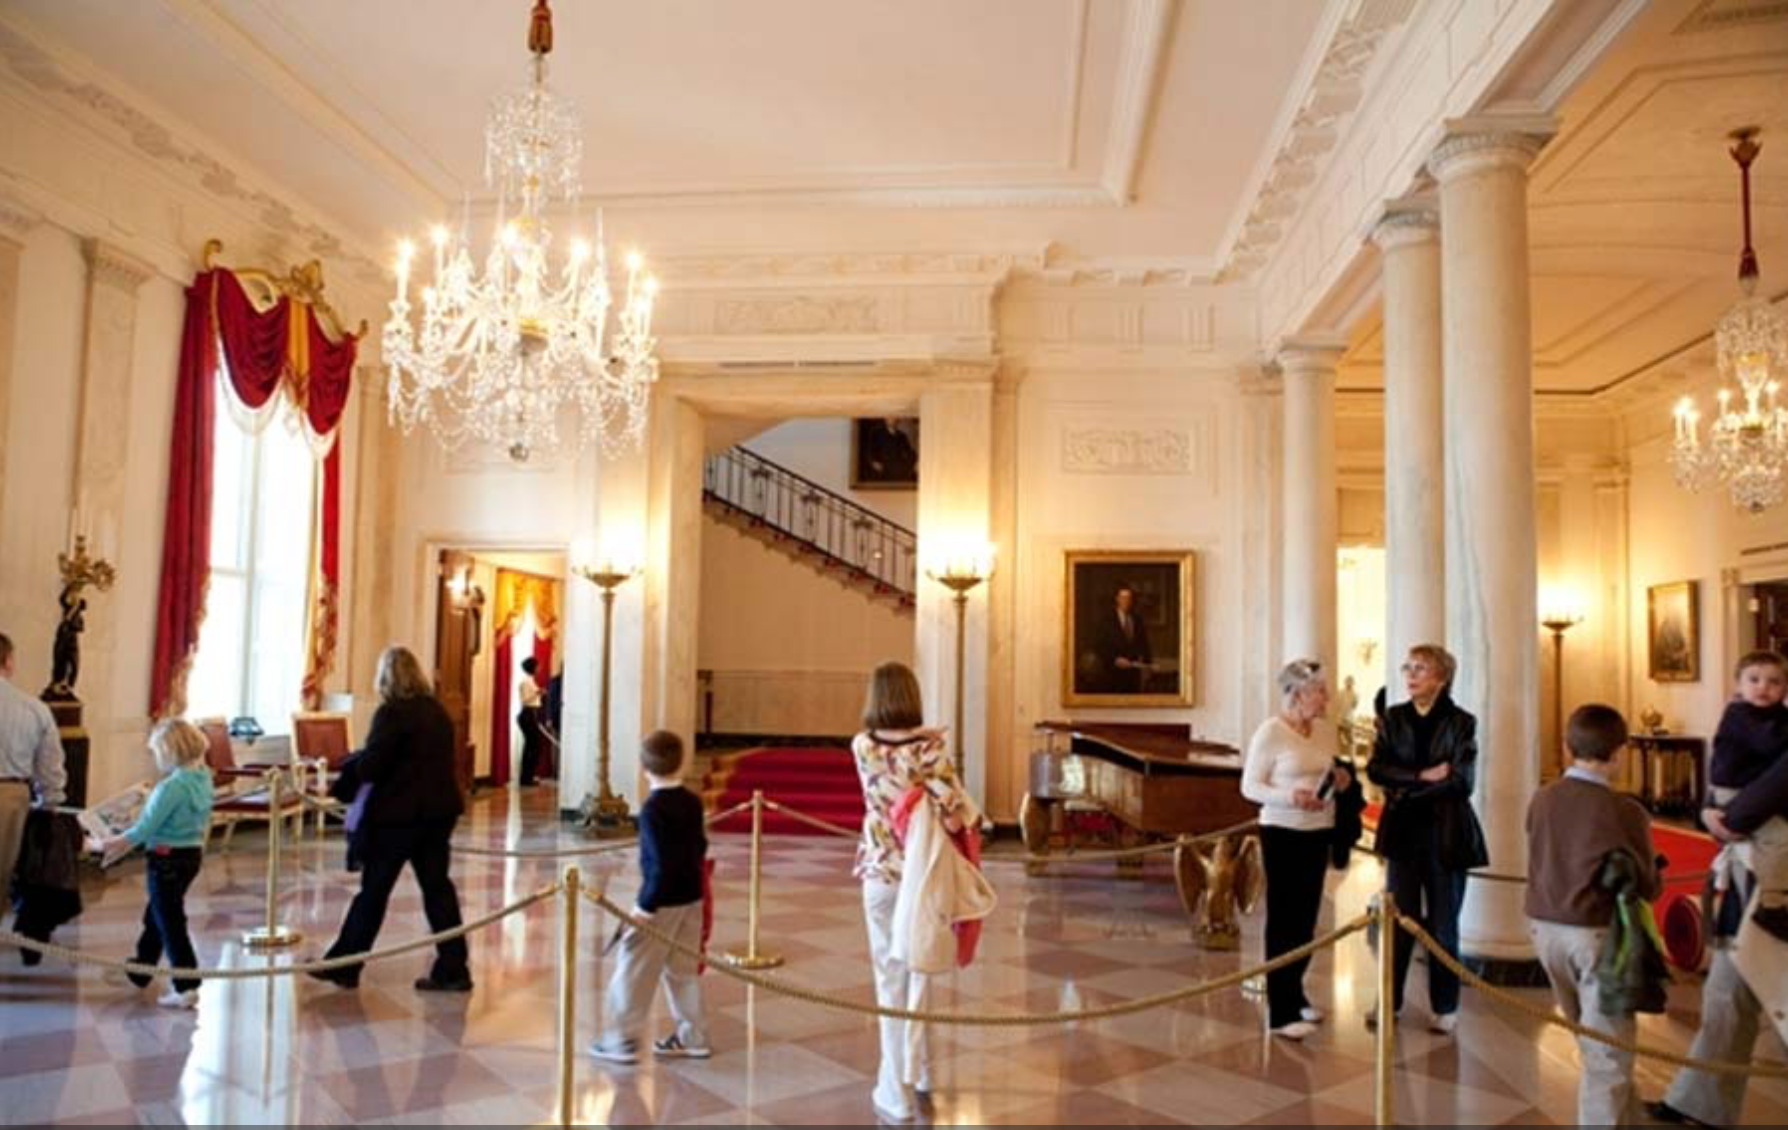 White House tours are coming back — what you need to know and where to